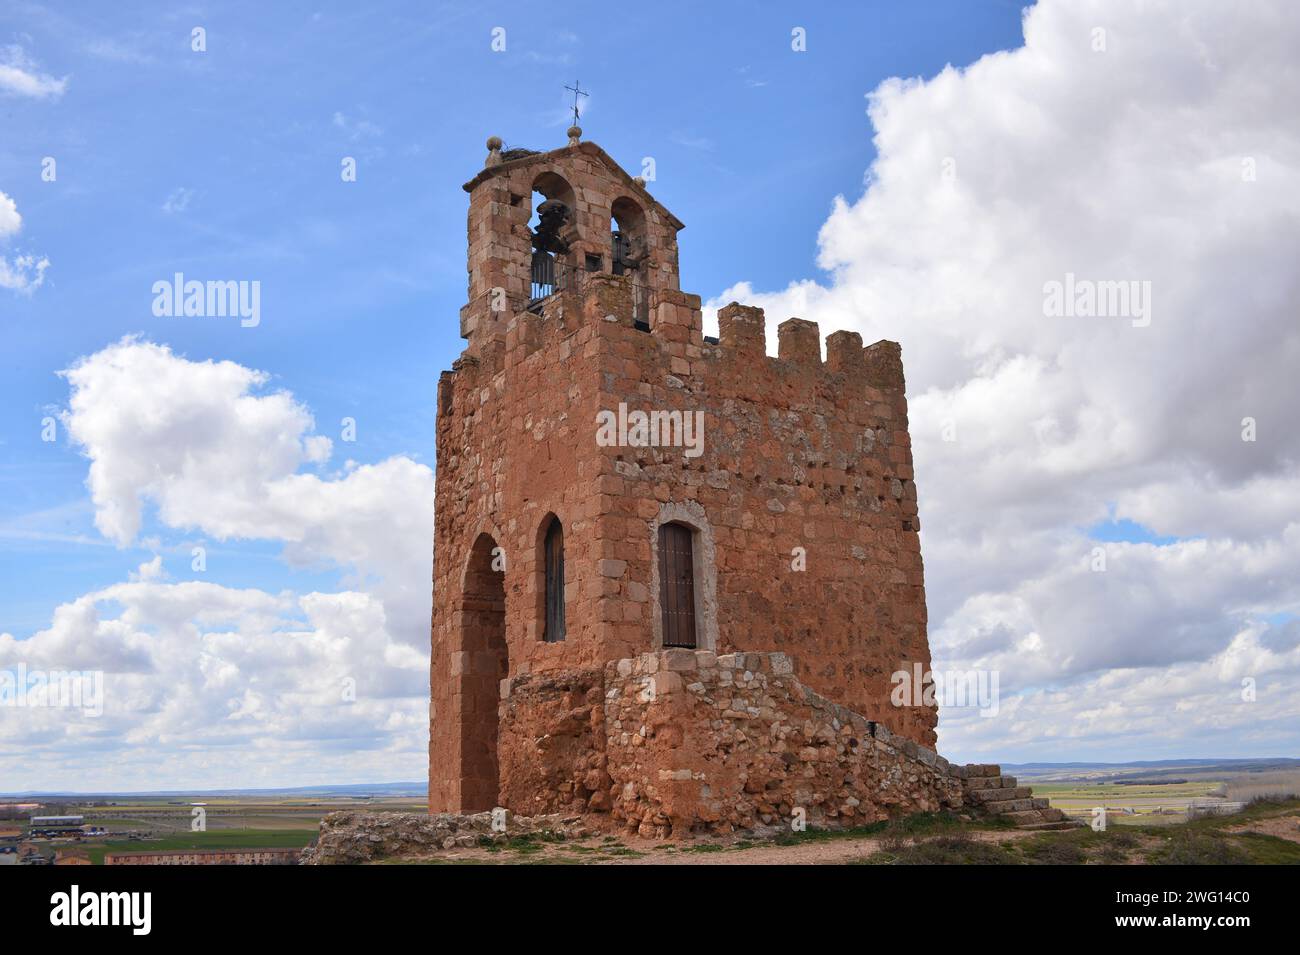 Medieval castle of Ayllon, also known as Torre de La Martina, in the charming town of Ayllon, Spain Stock Photo